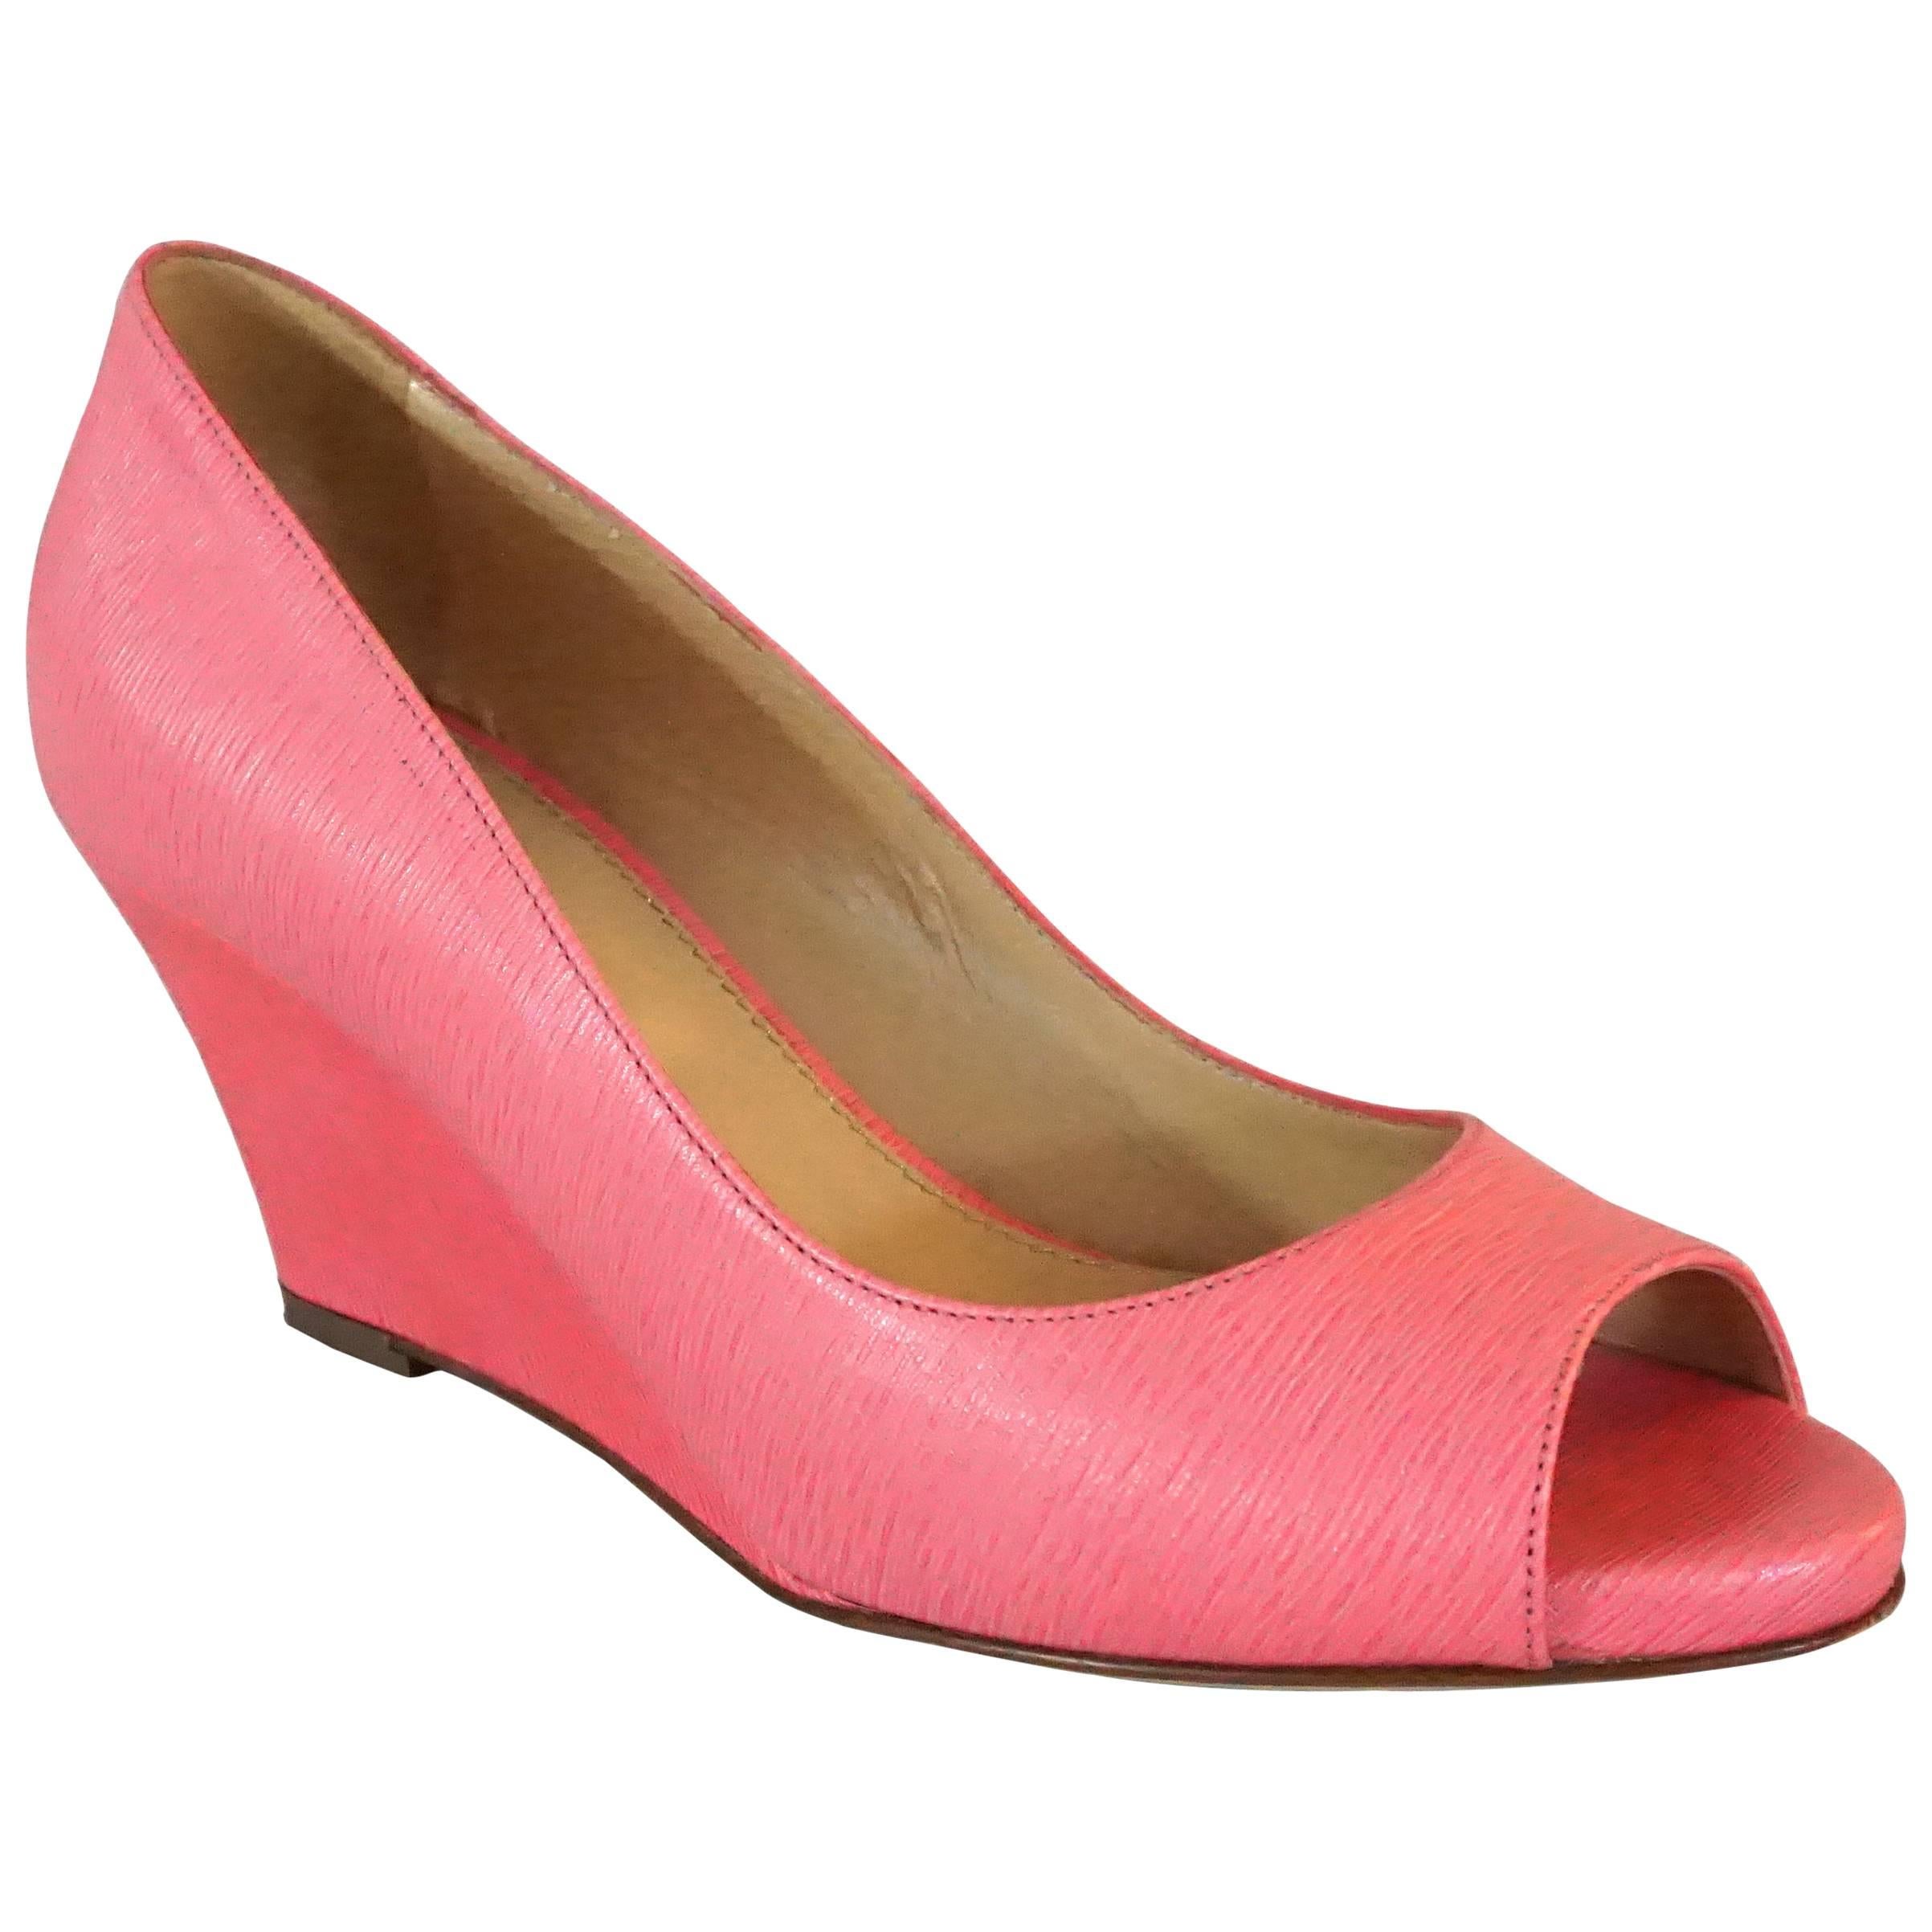 Sergio Rossi Pink Epi Leather Open Toe Wedges - 36.5